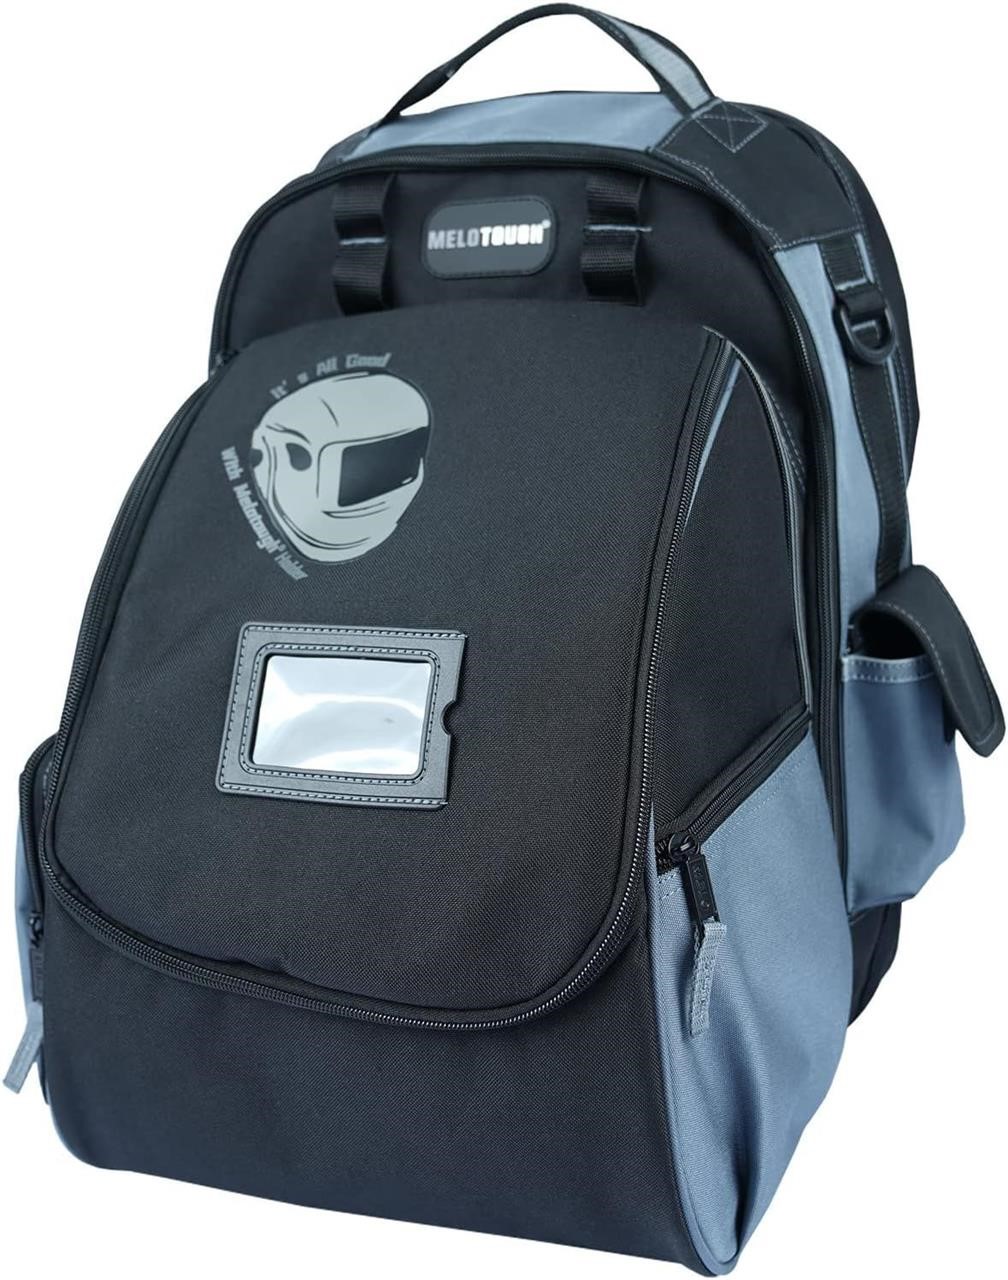 $70 Welding Backpack for Tools and Helmet